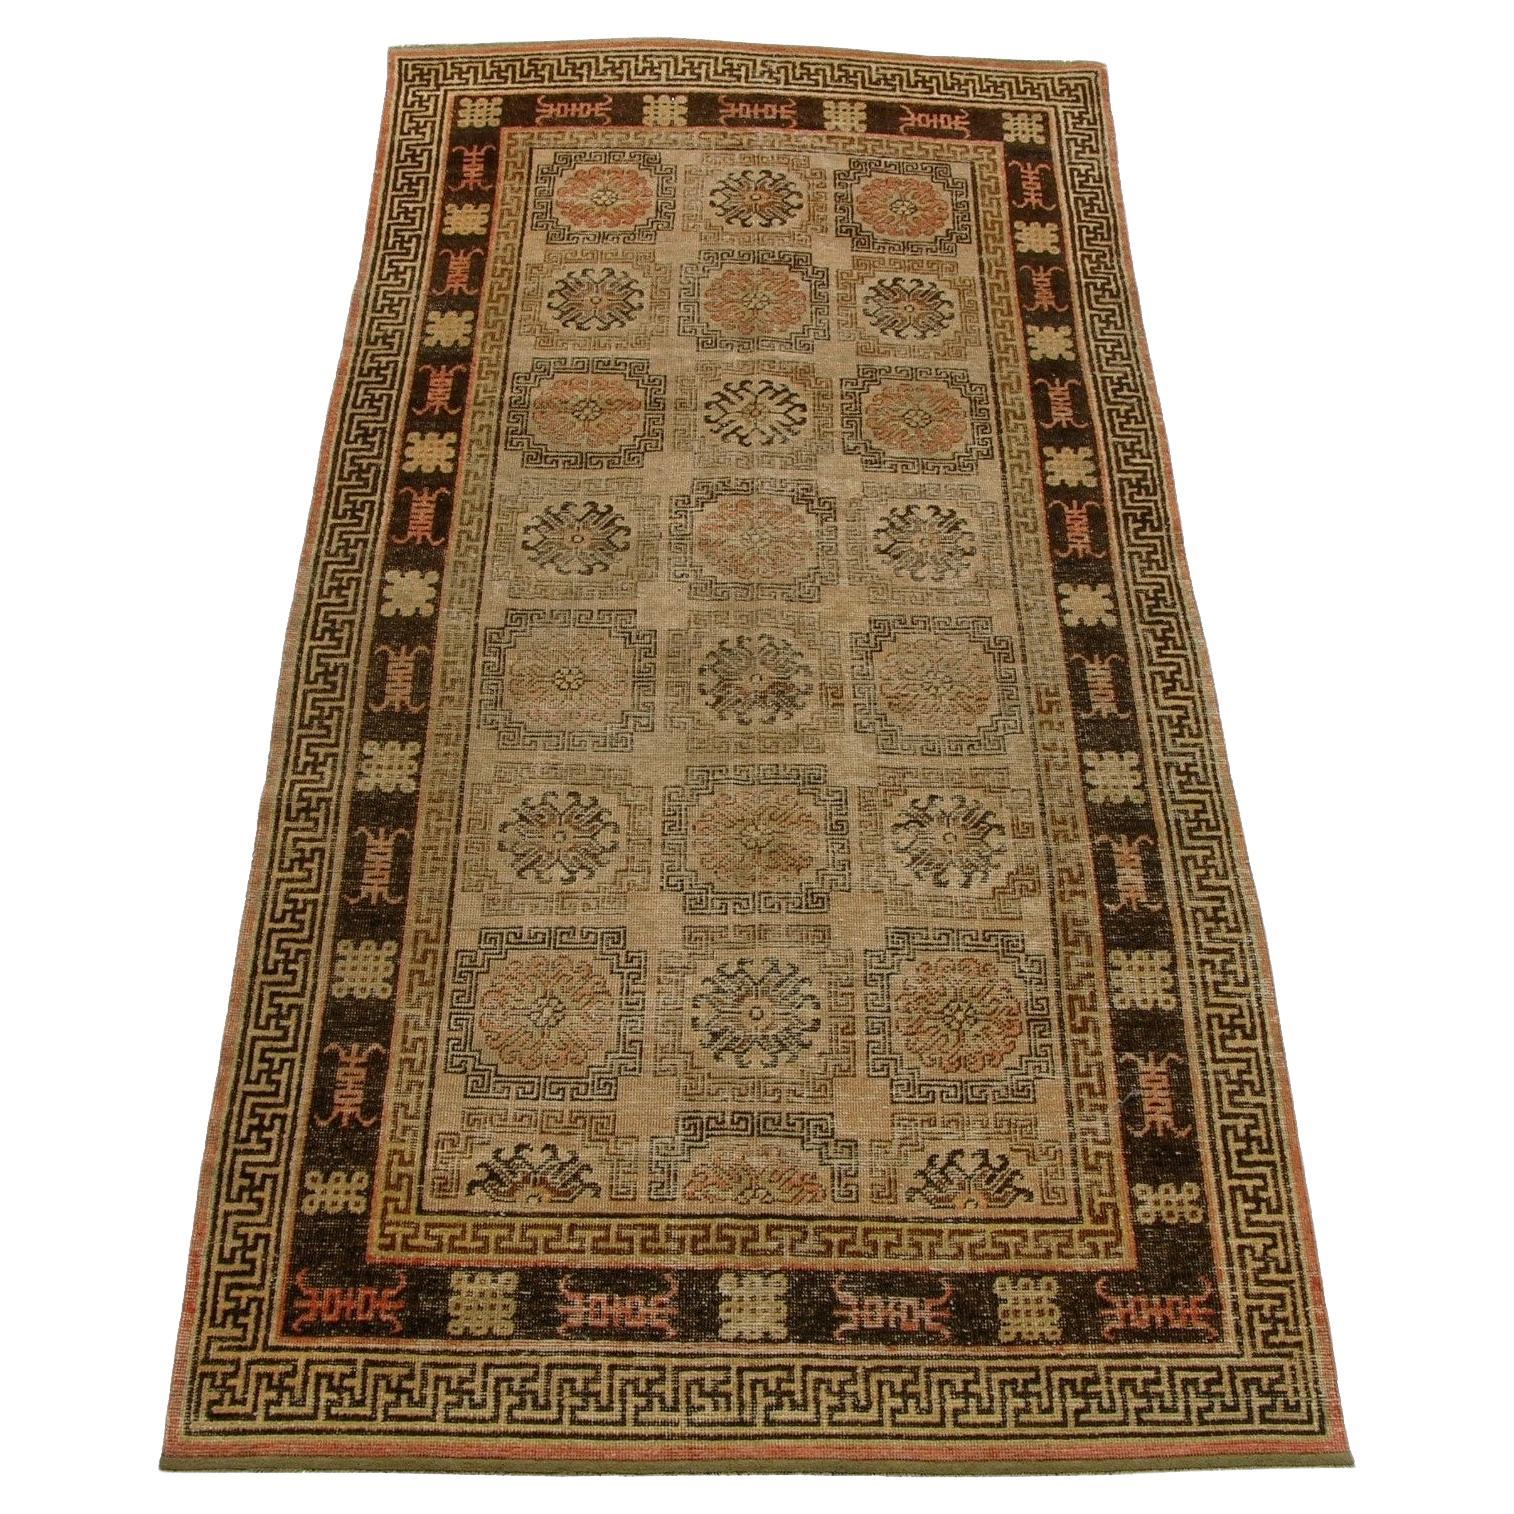 1900th Century Antique Samarkand Rug 9.2" X 4.5" For Sale